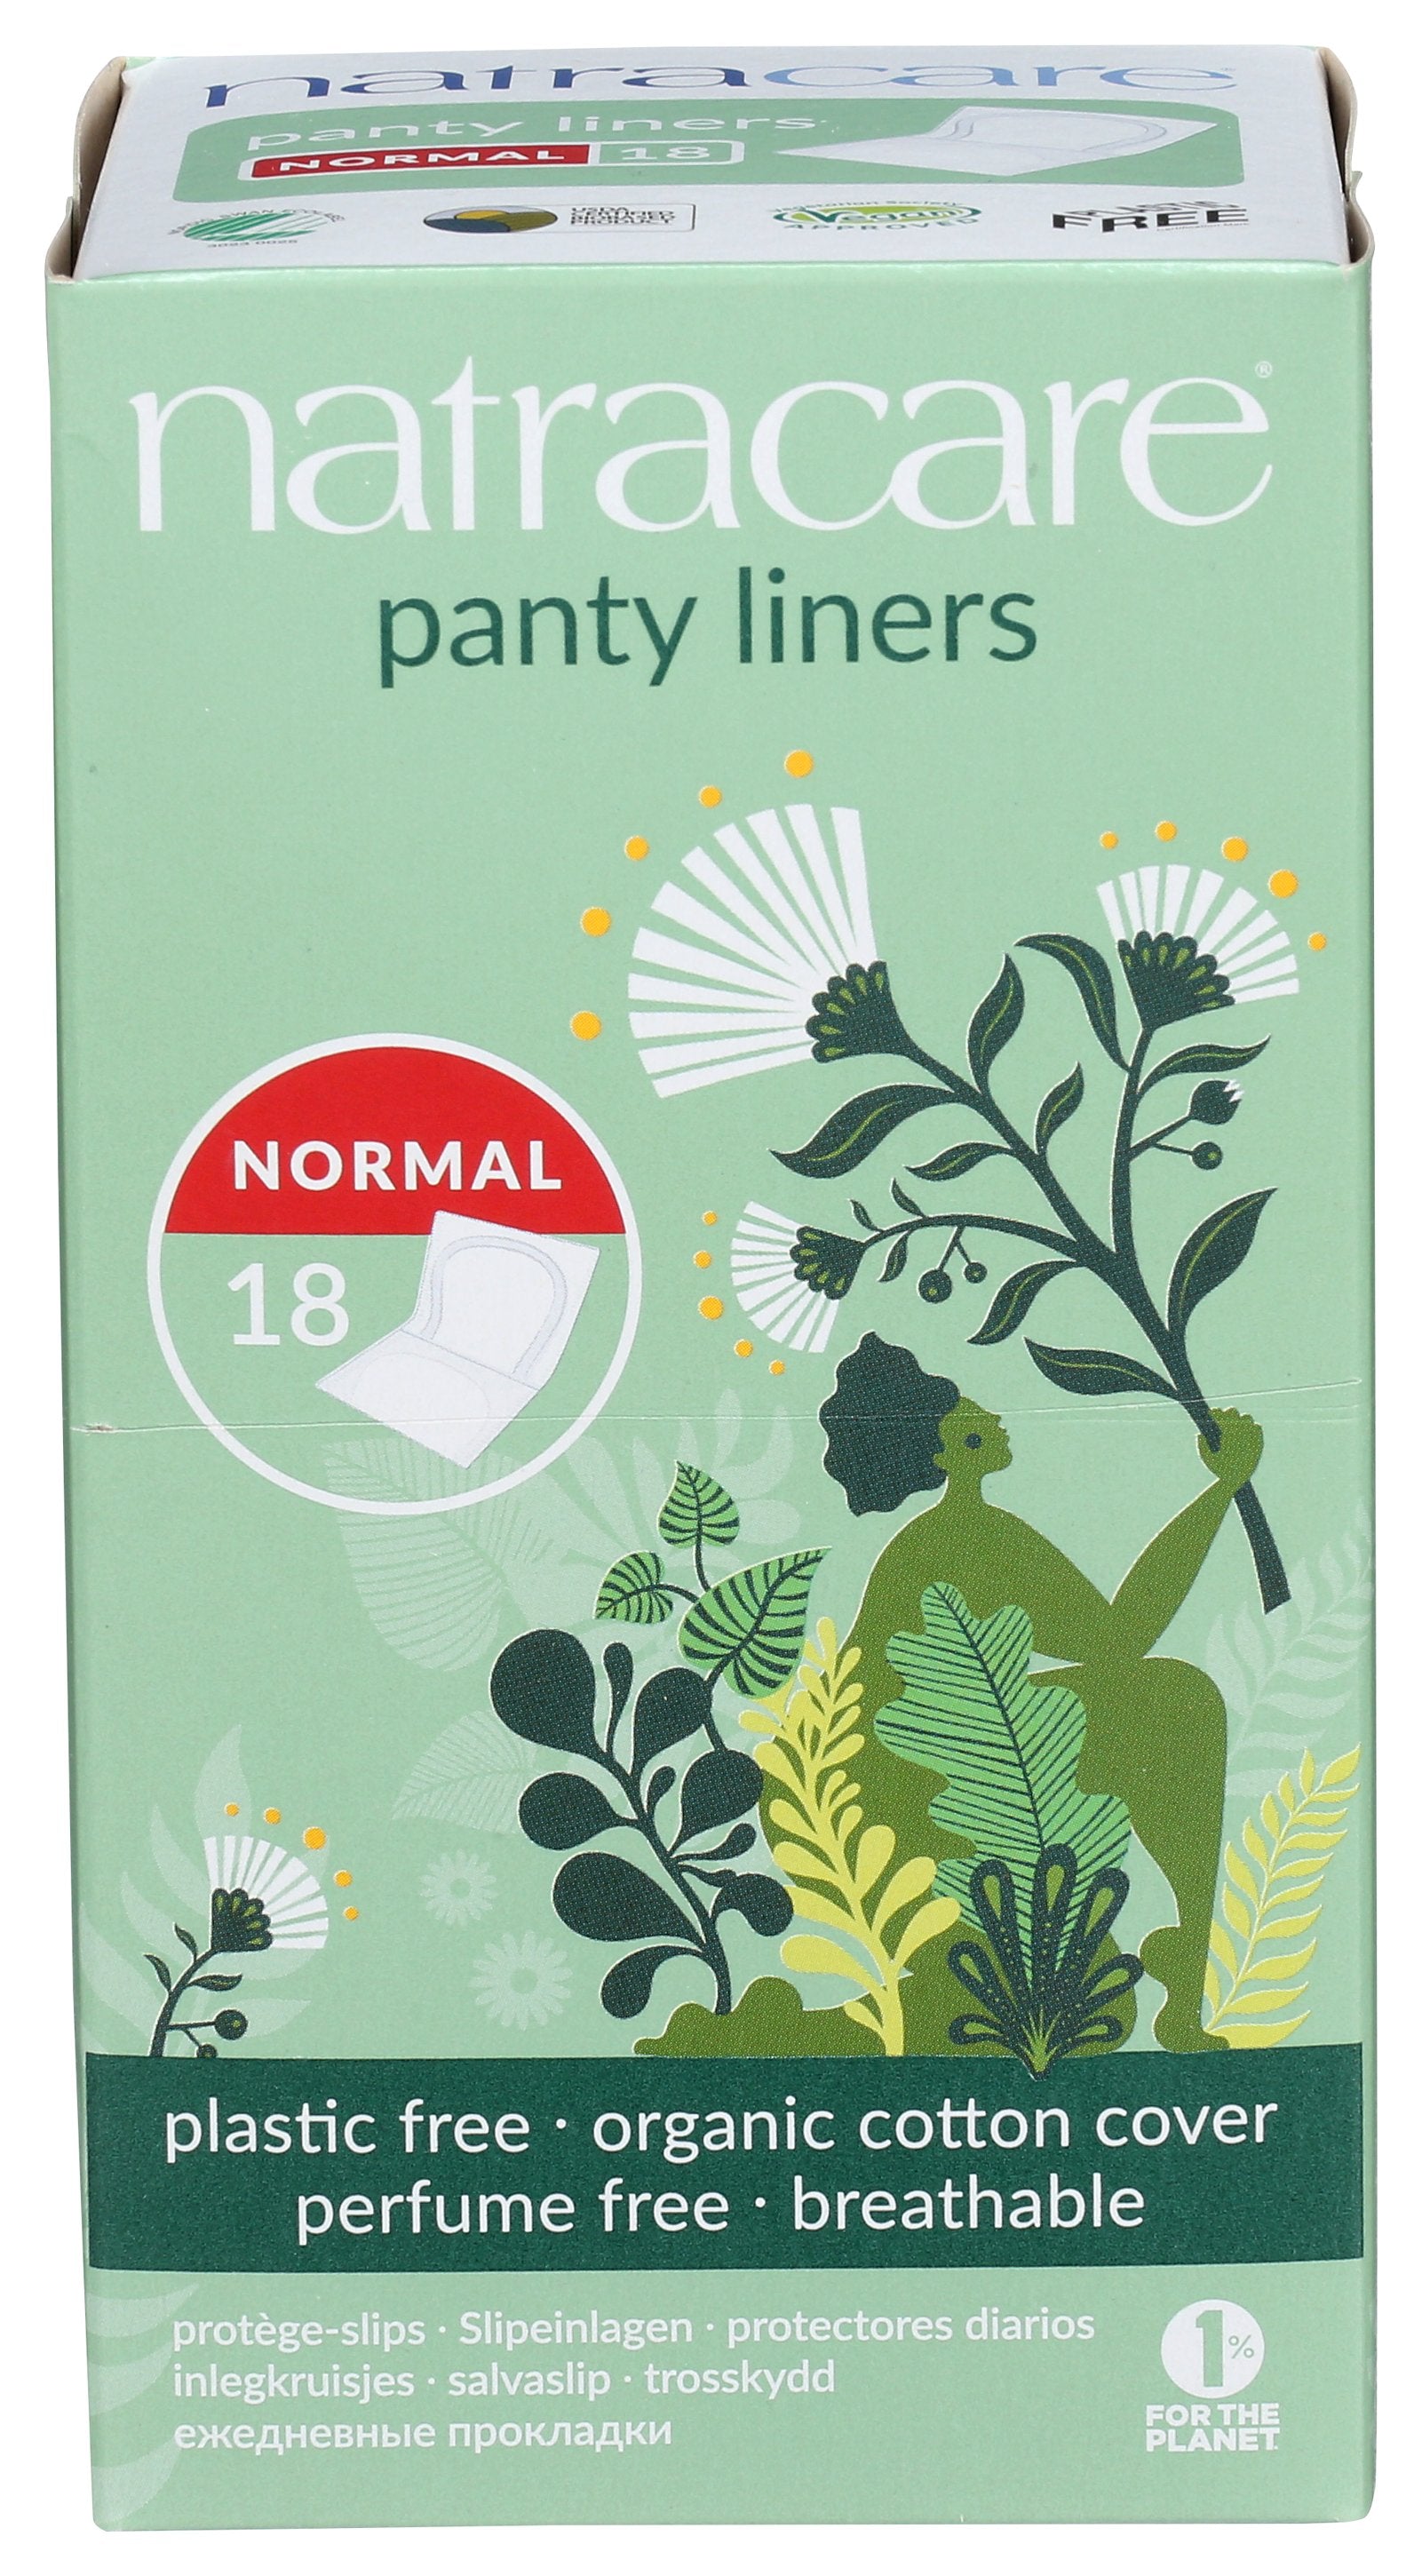 NATRACARE PANTY LINER WRAPPED - Case of 5